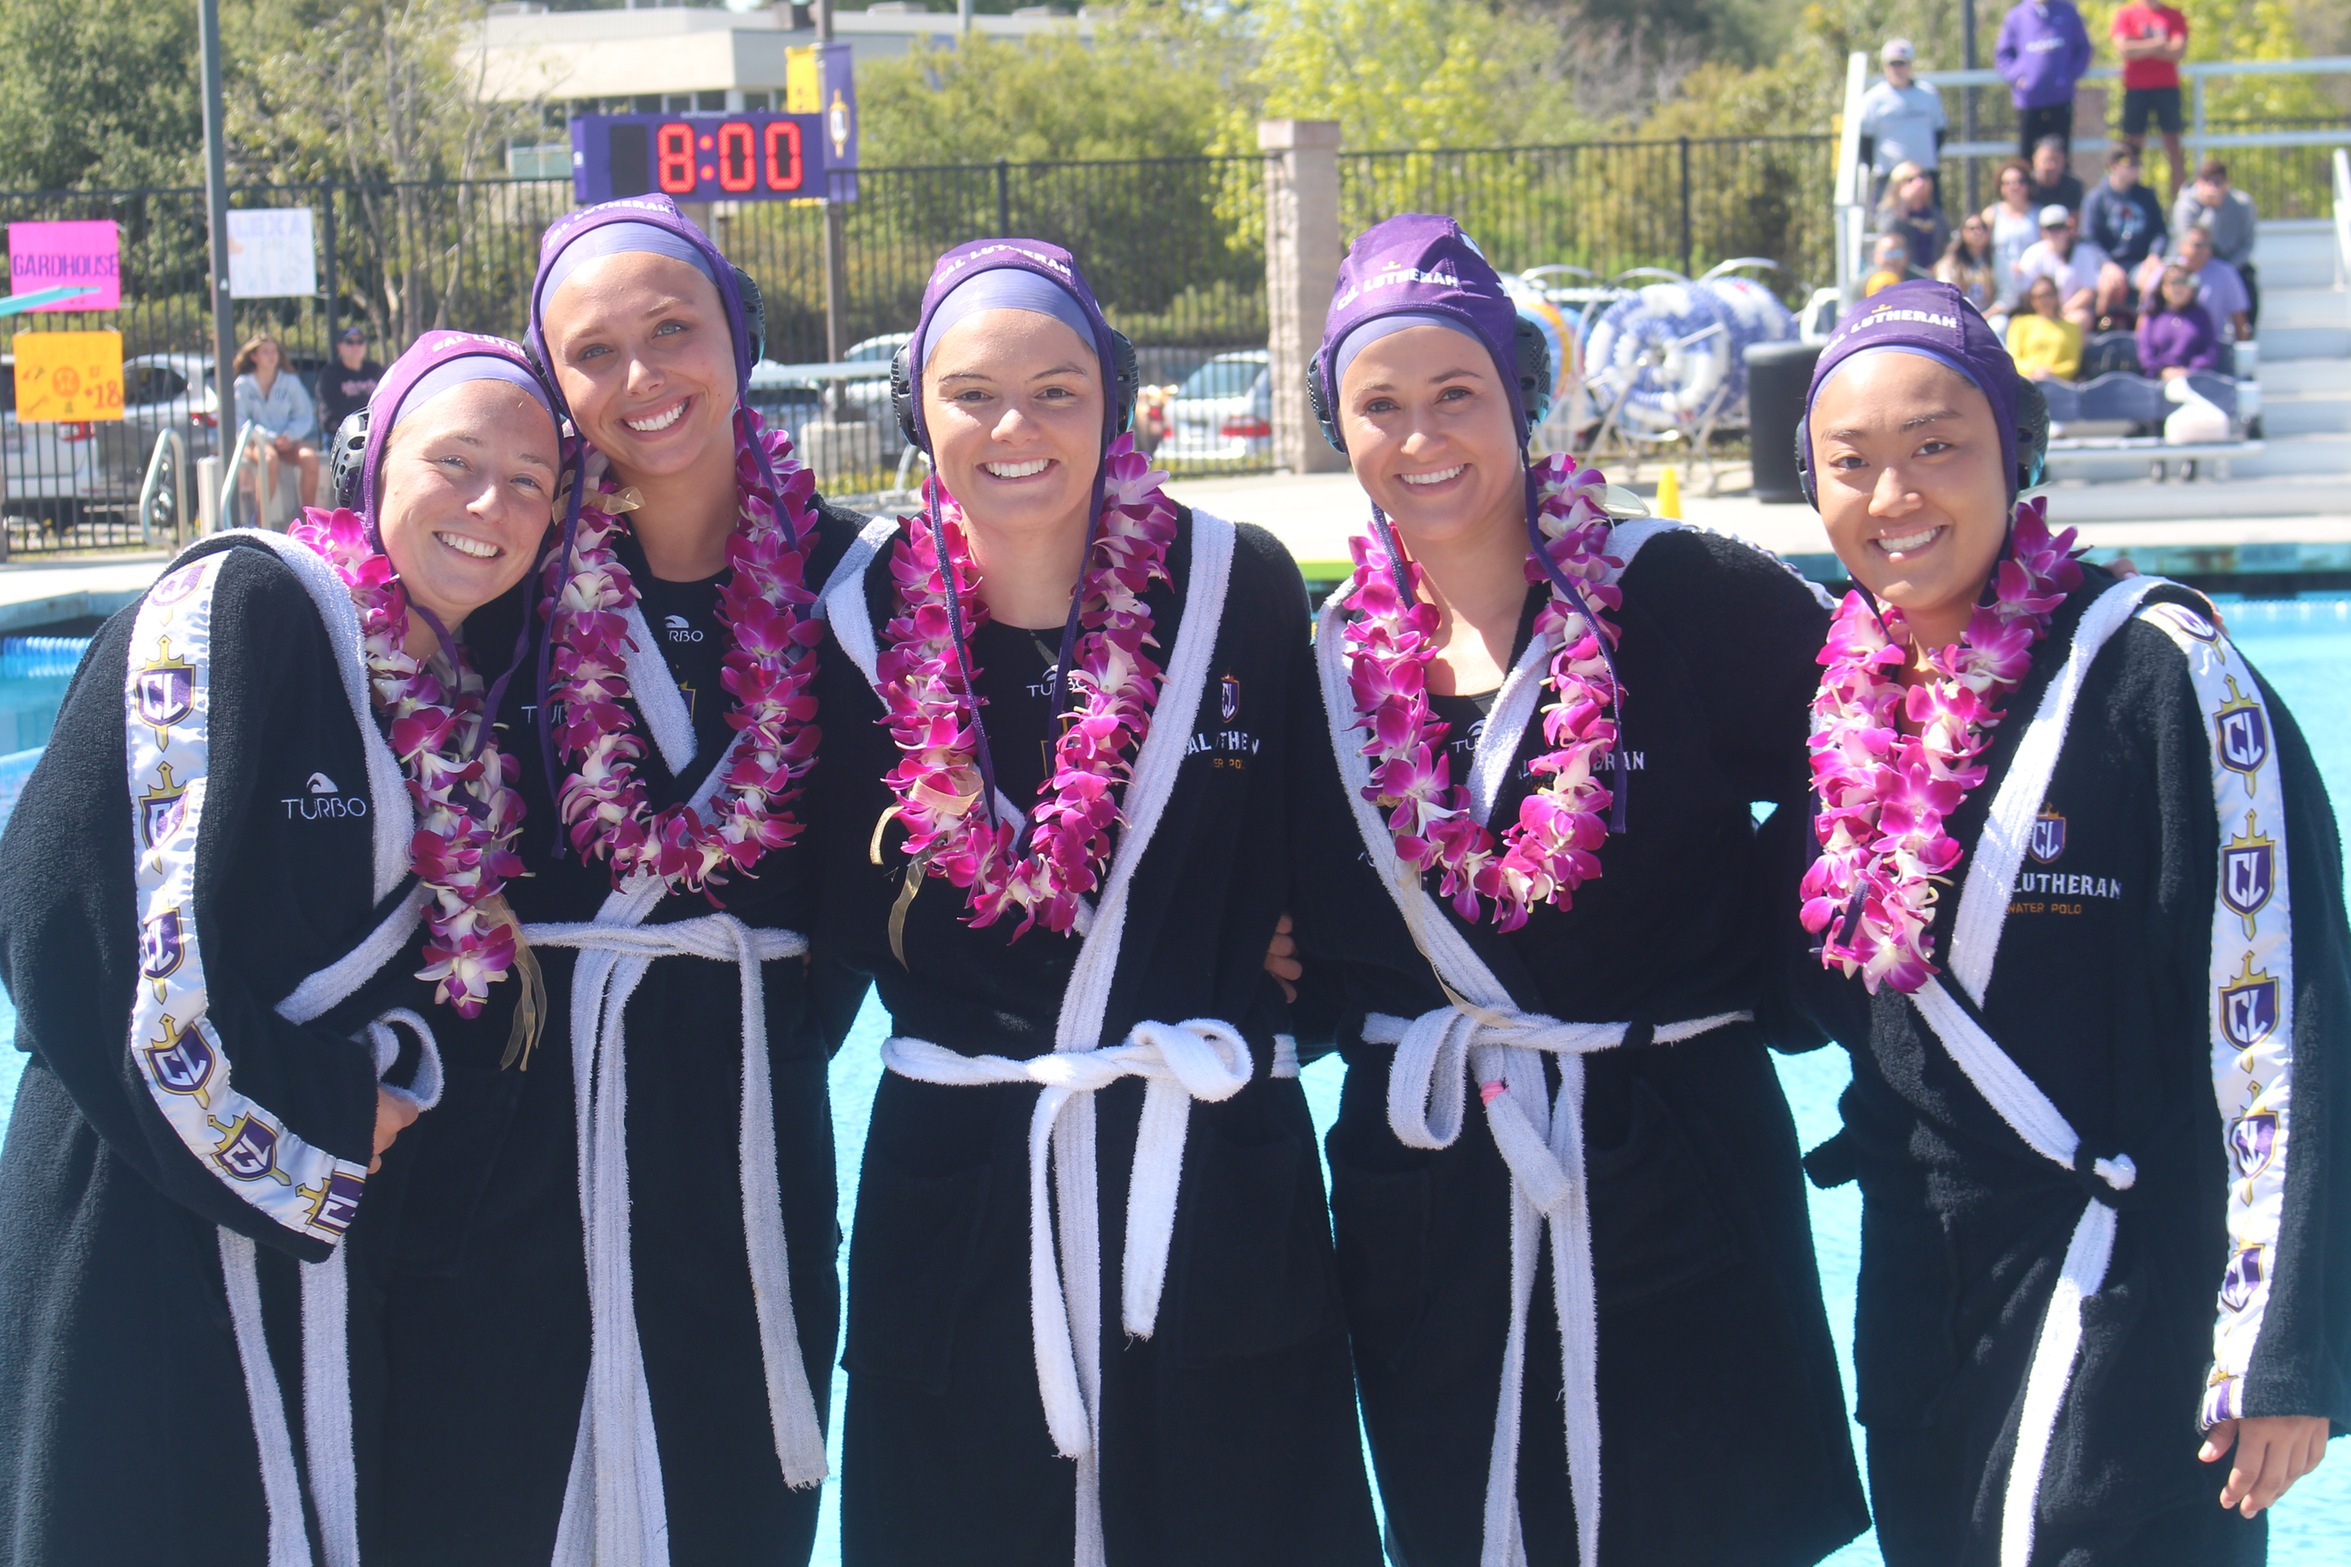 Regals Victorious on Senior Day, Defeat Occidental